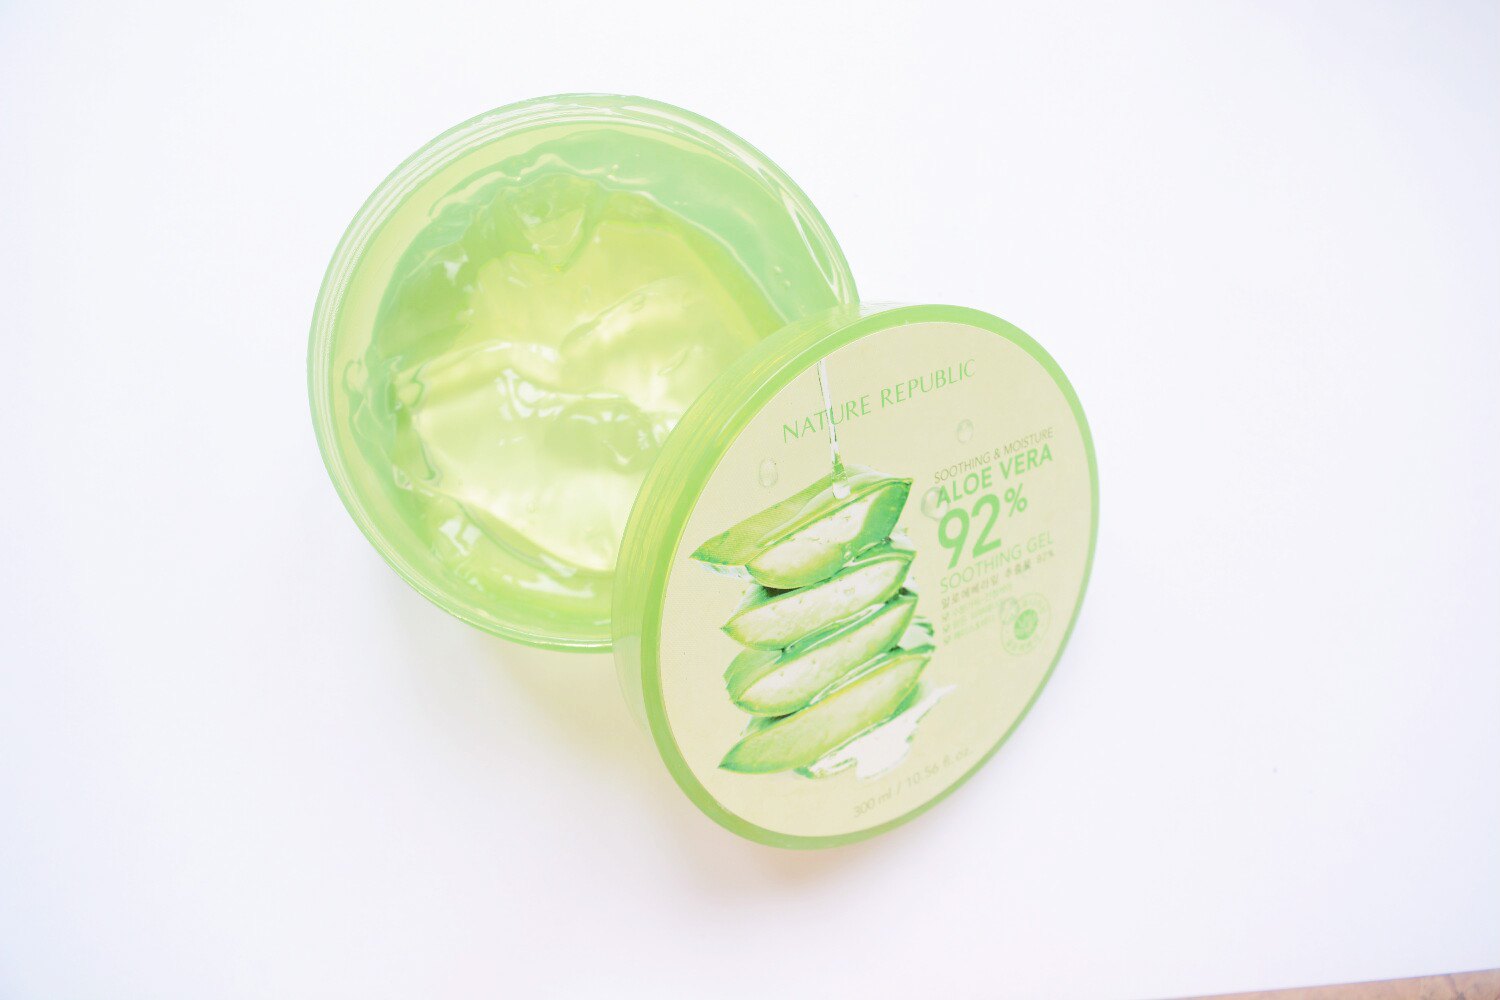 Nature Republic Soothing and Moisture Aloe Vera Soothing Gel Review